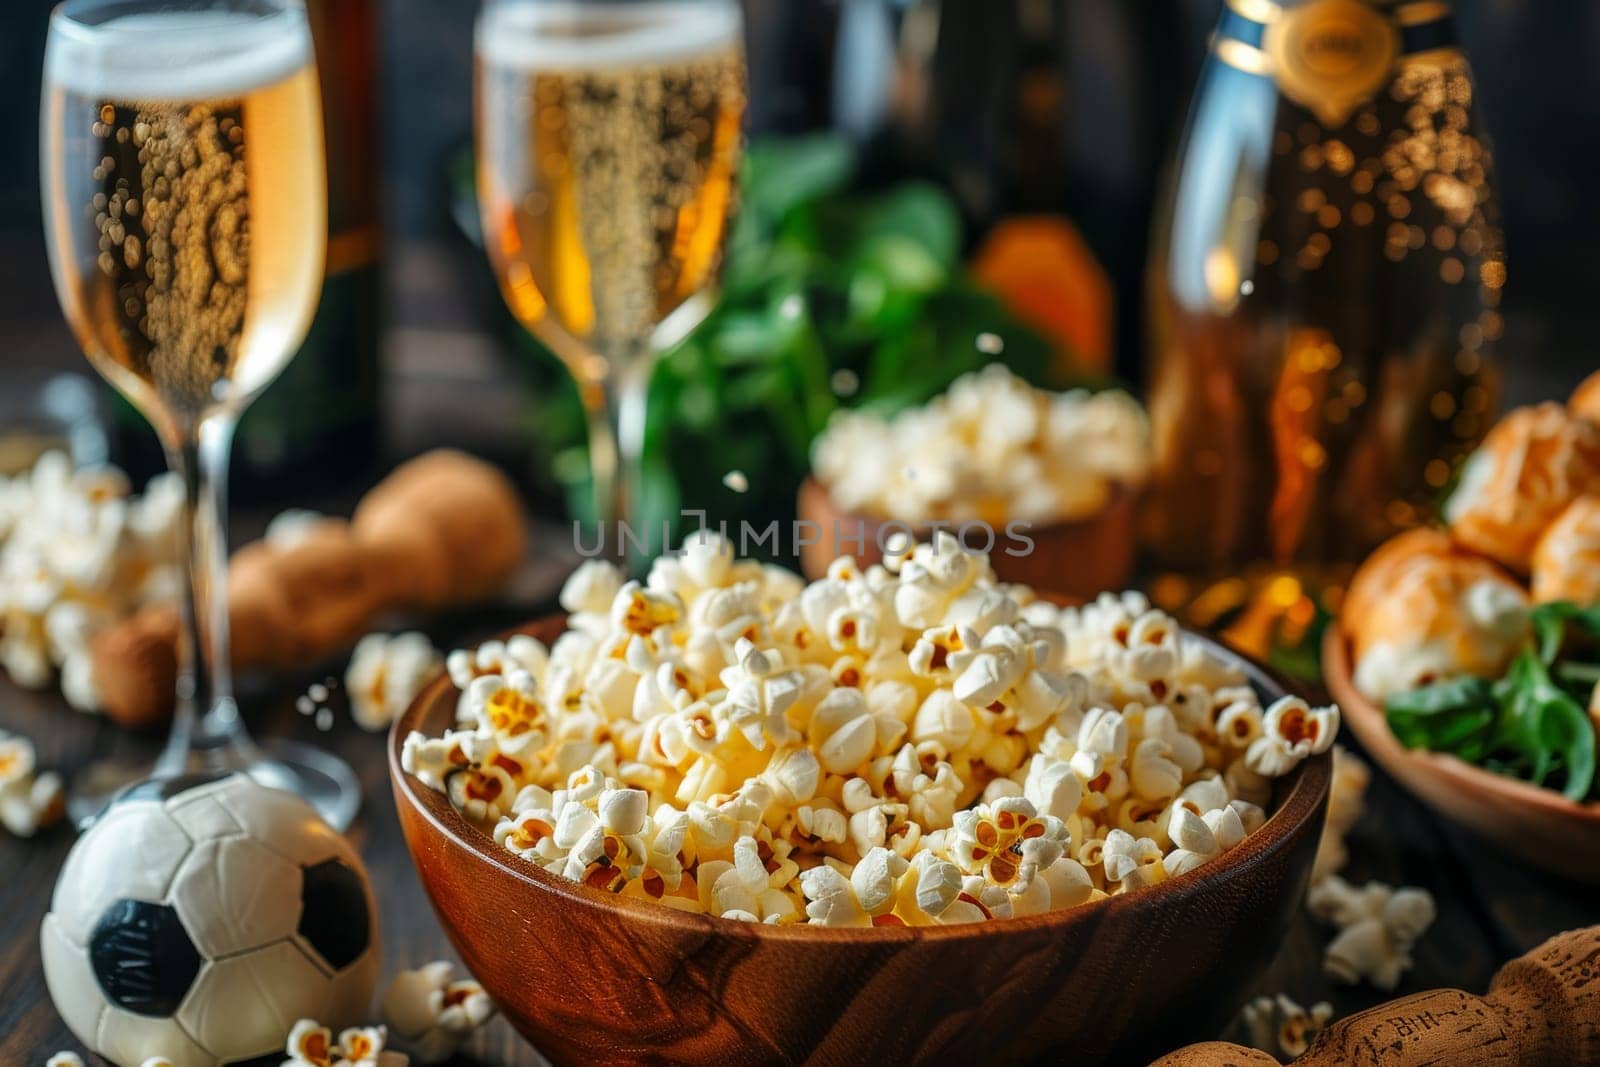 A bowl of popcorn and a glass of beer on a table. The scene is casual and relaxed, perfect for a movie night or a night in with friends